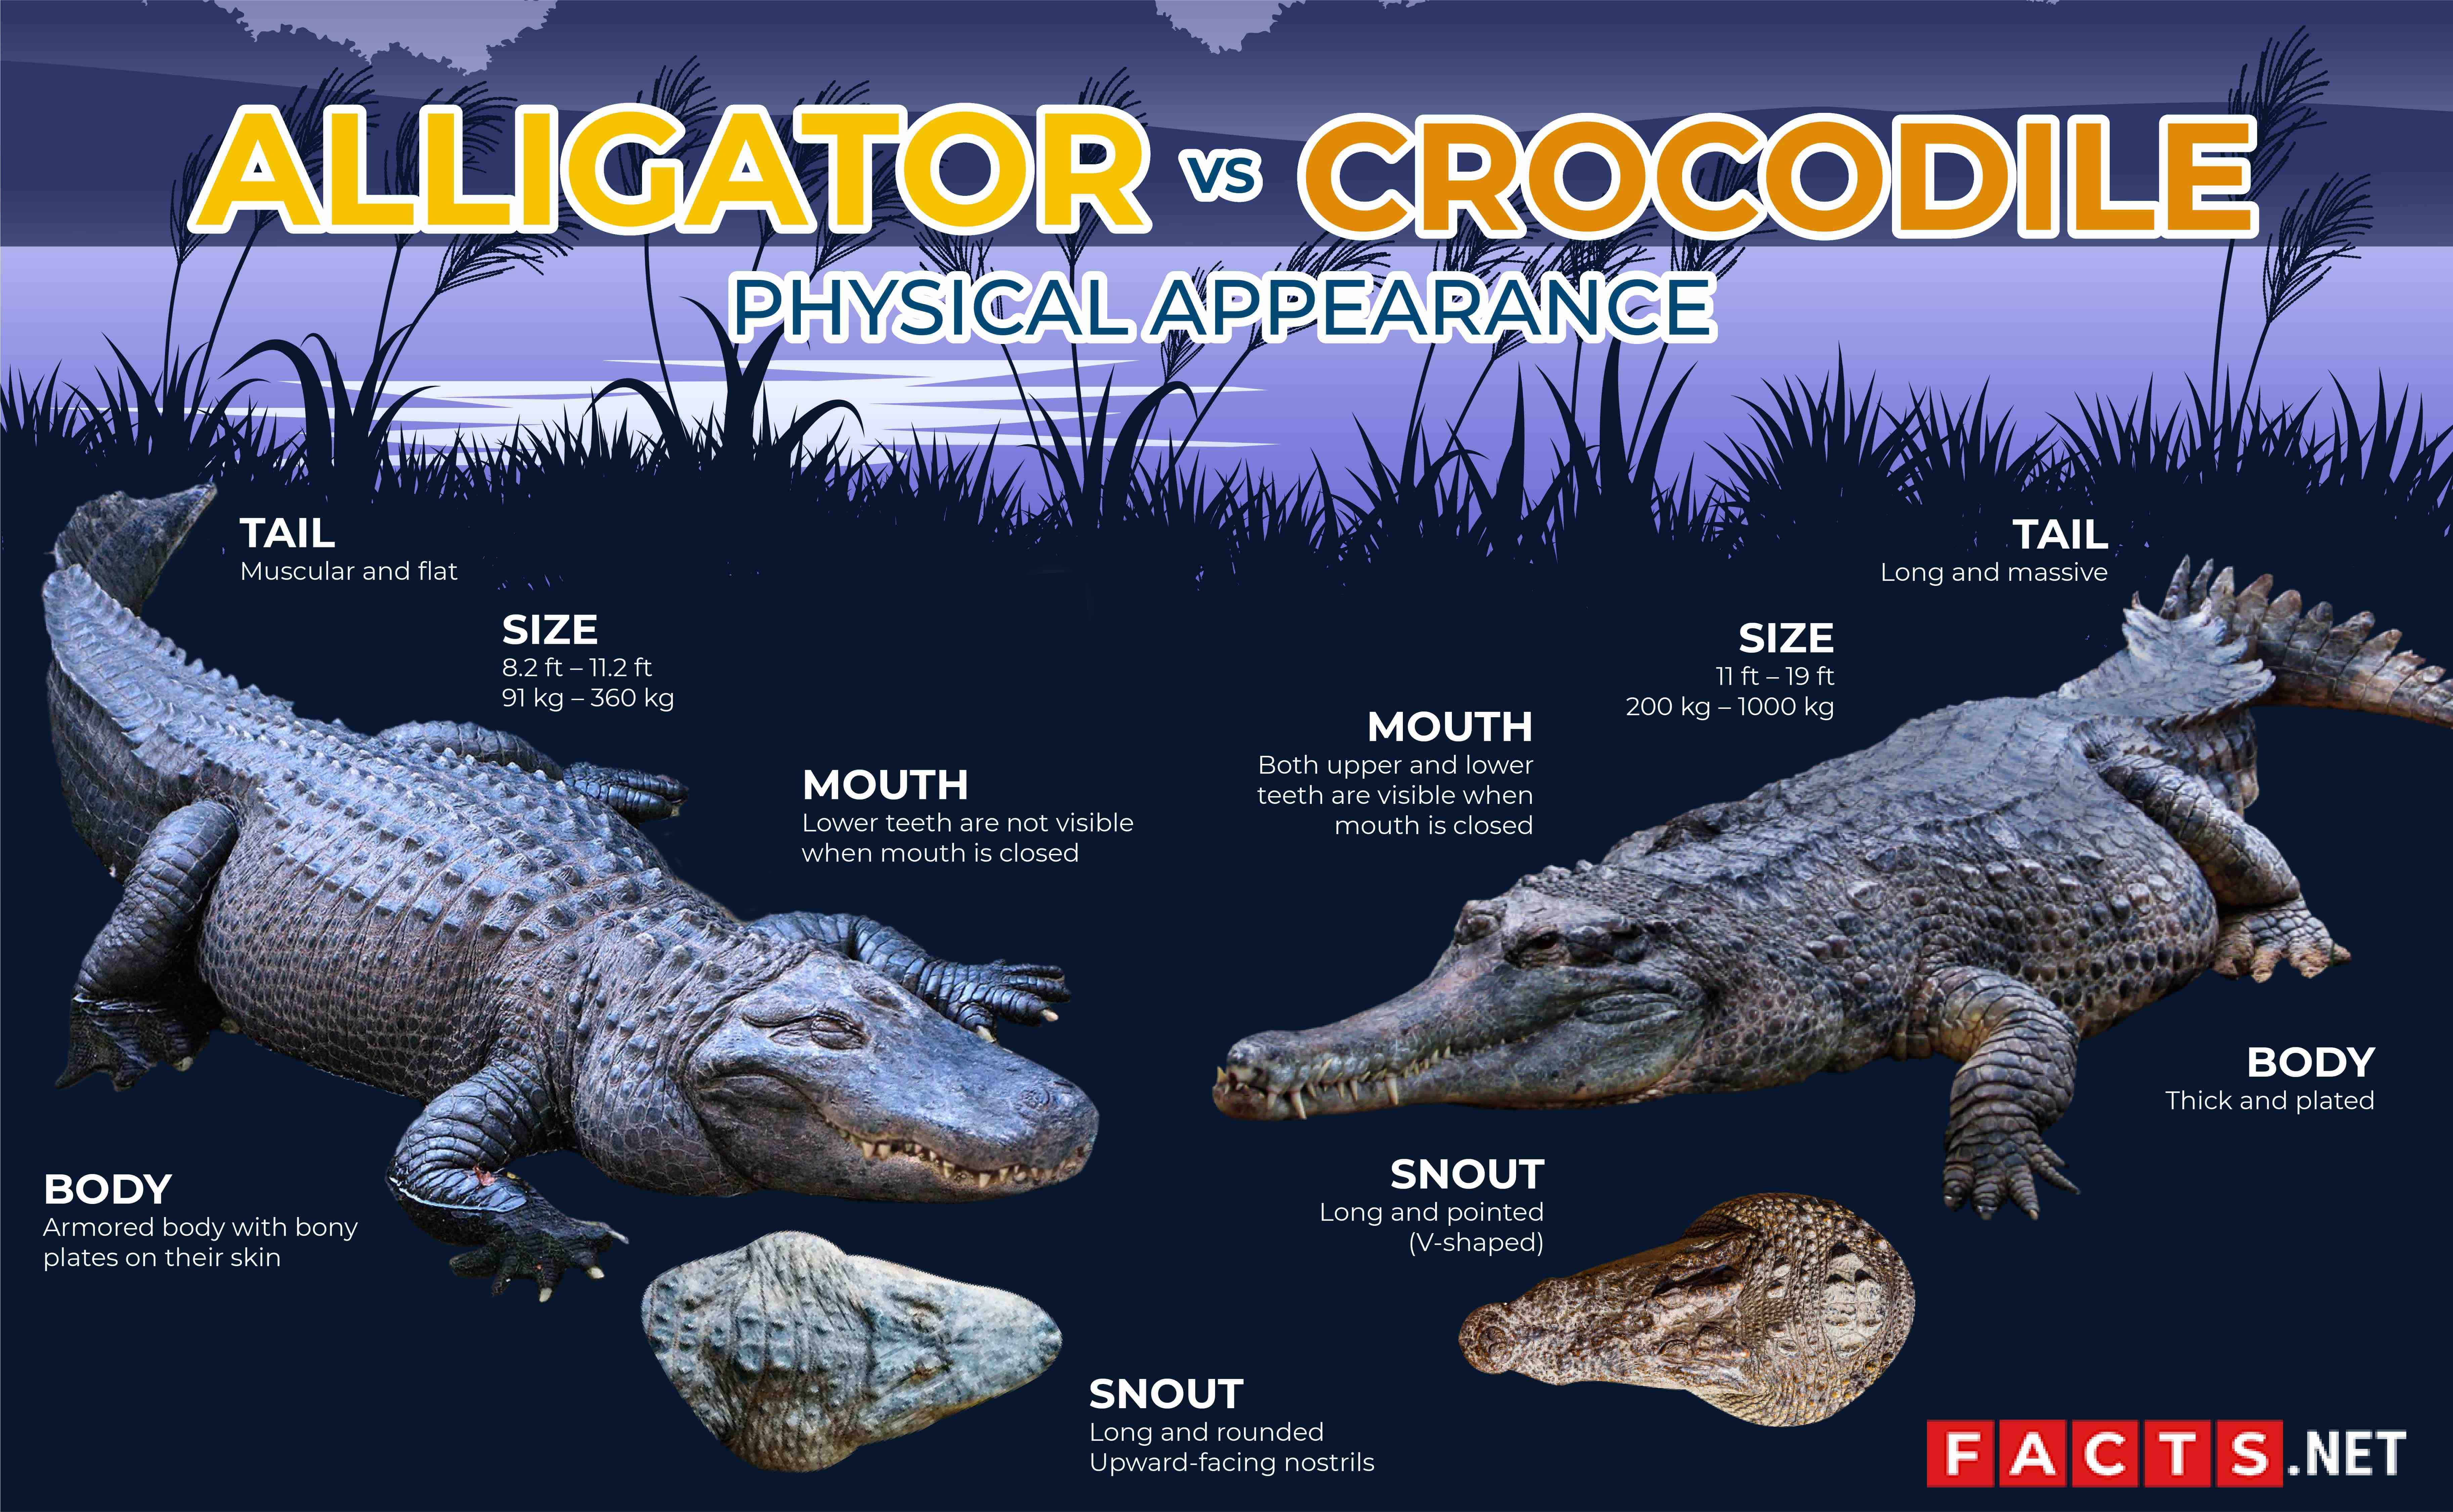 What Is The Difference Between An Alligator and A Crocodile?